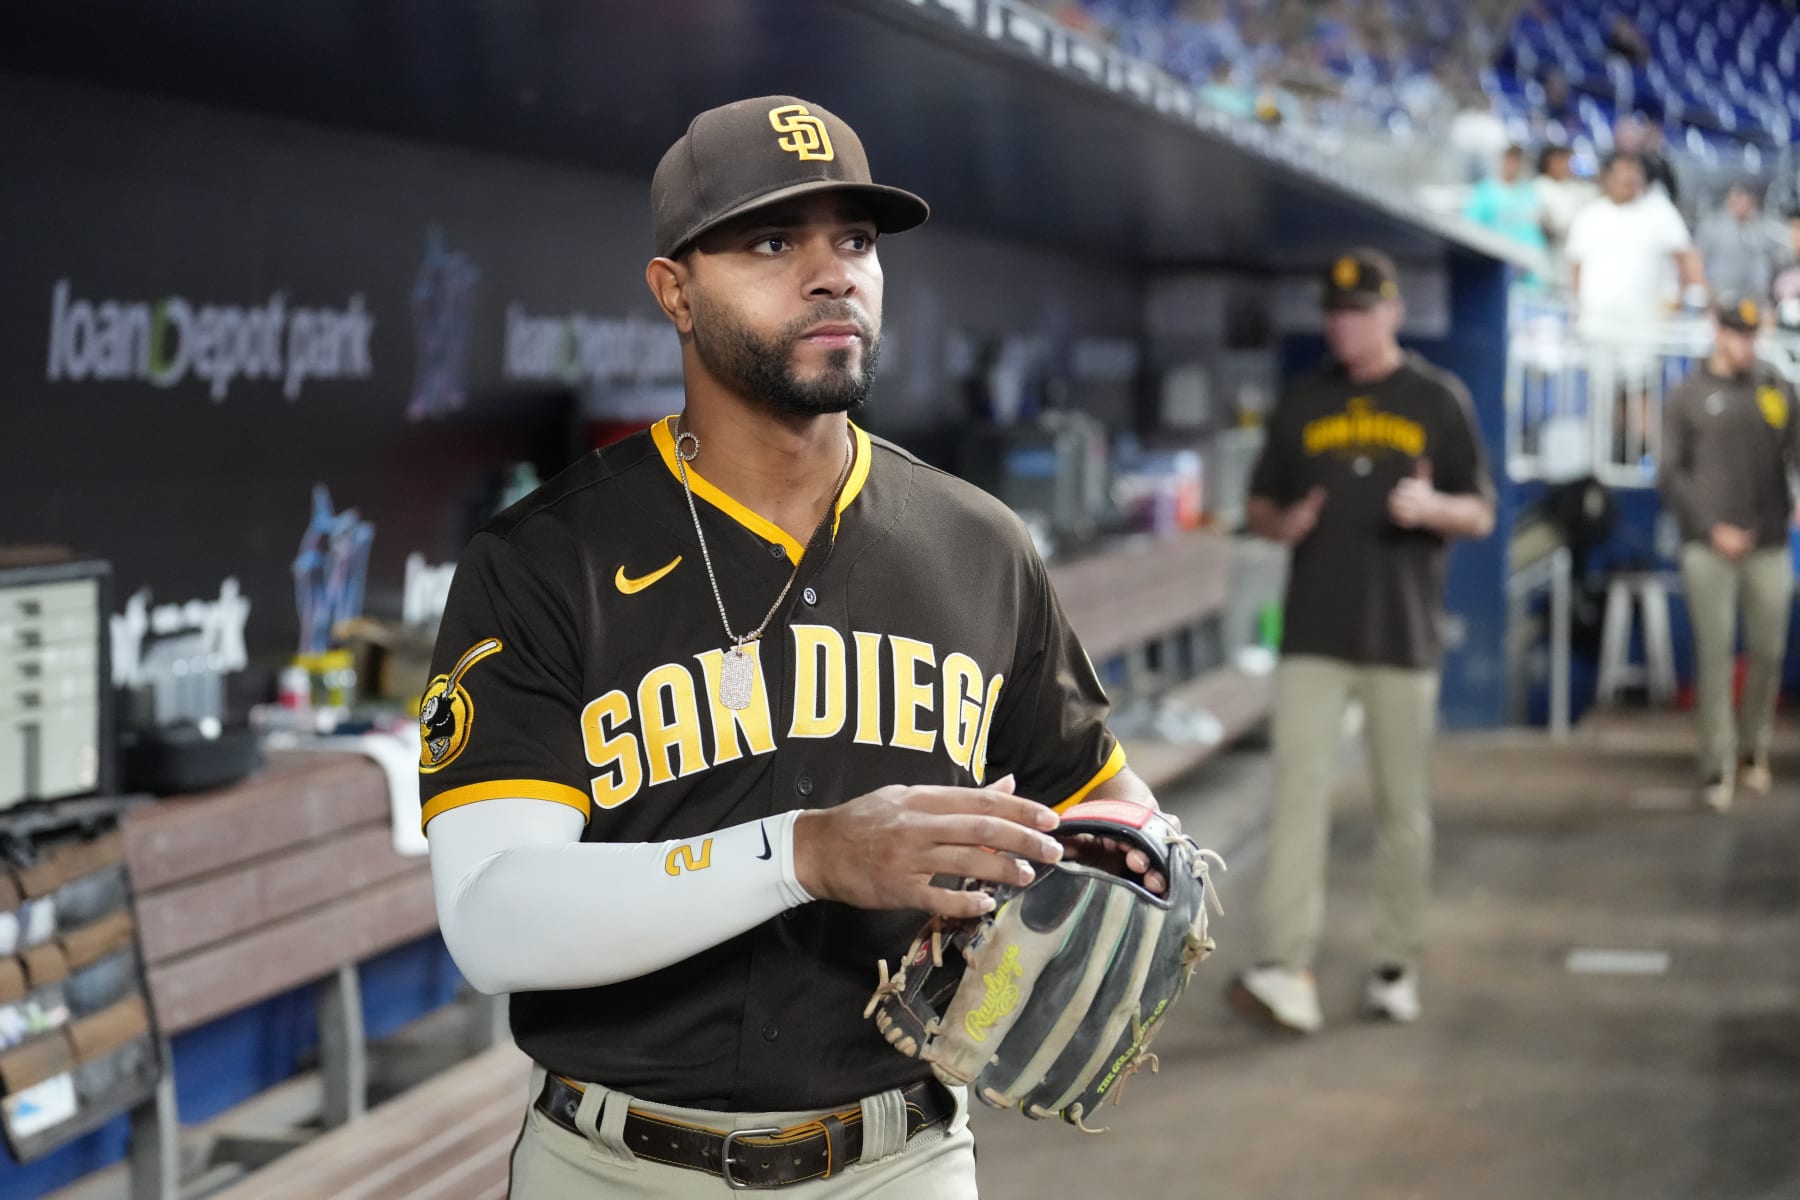 San Diego Padres on X: Pinstripes under the lights. @snellzilla4